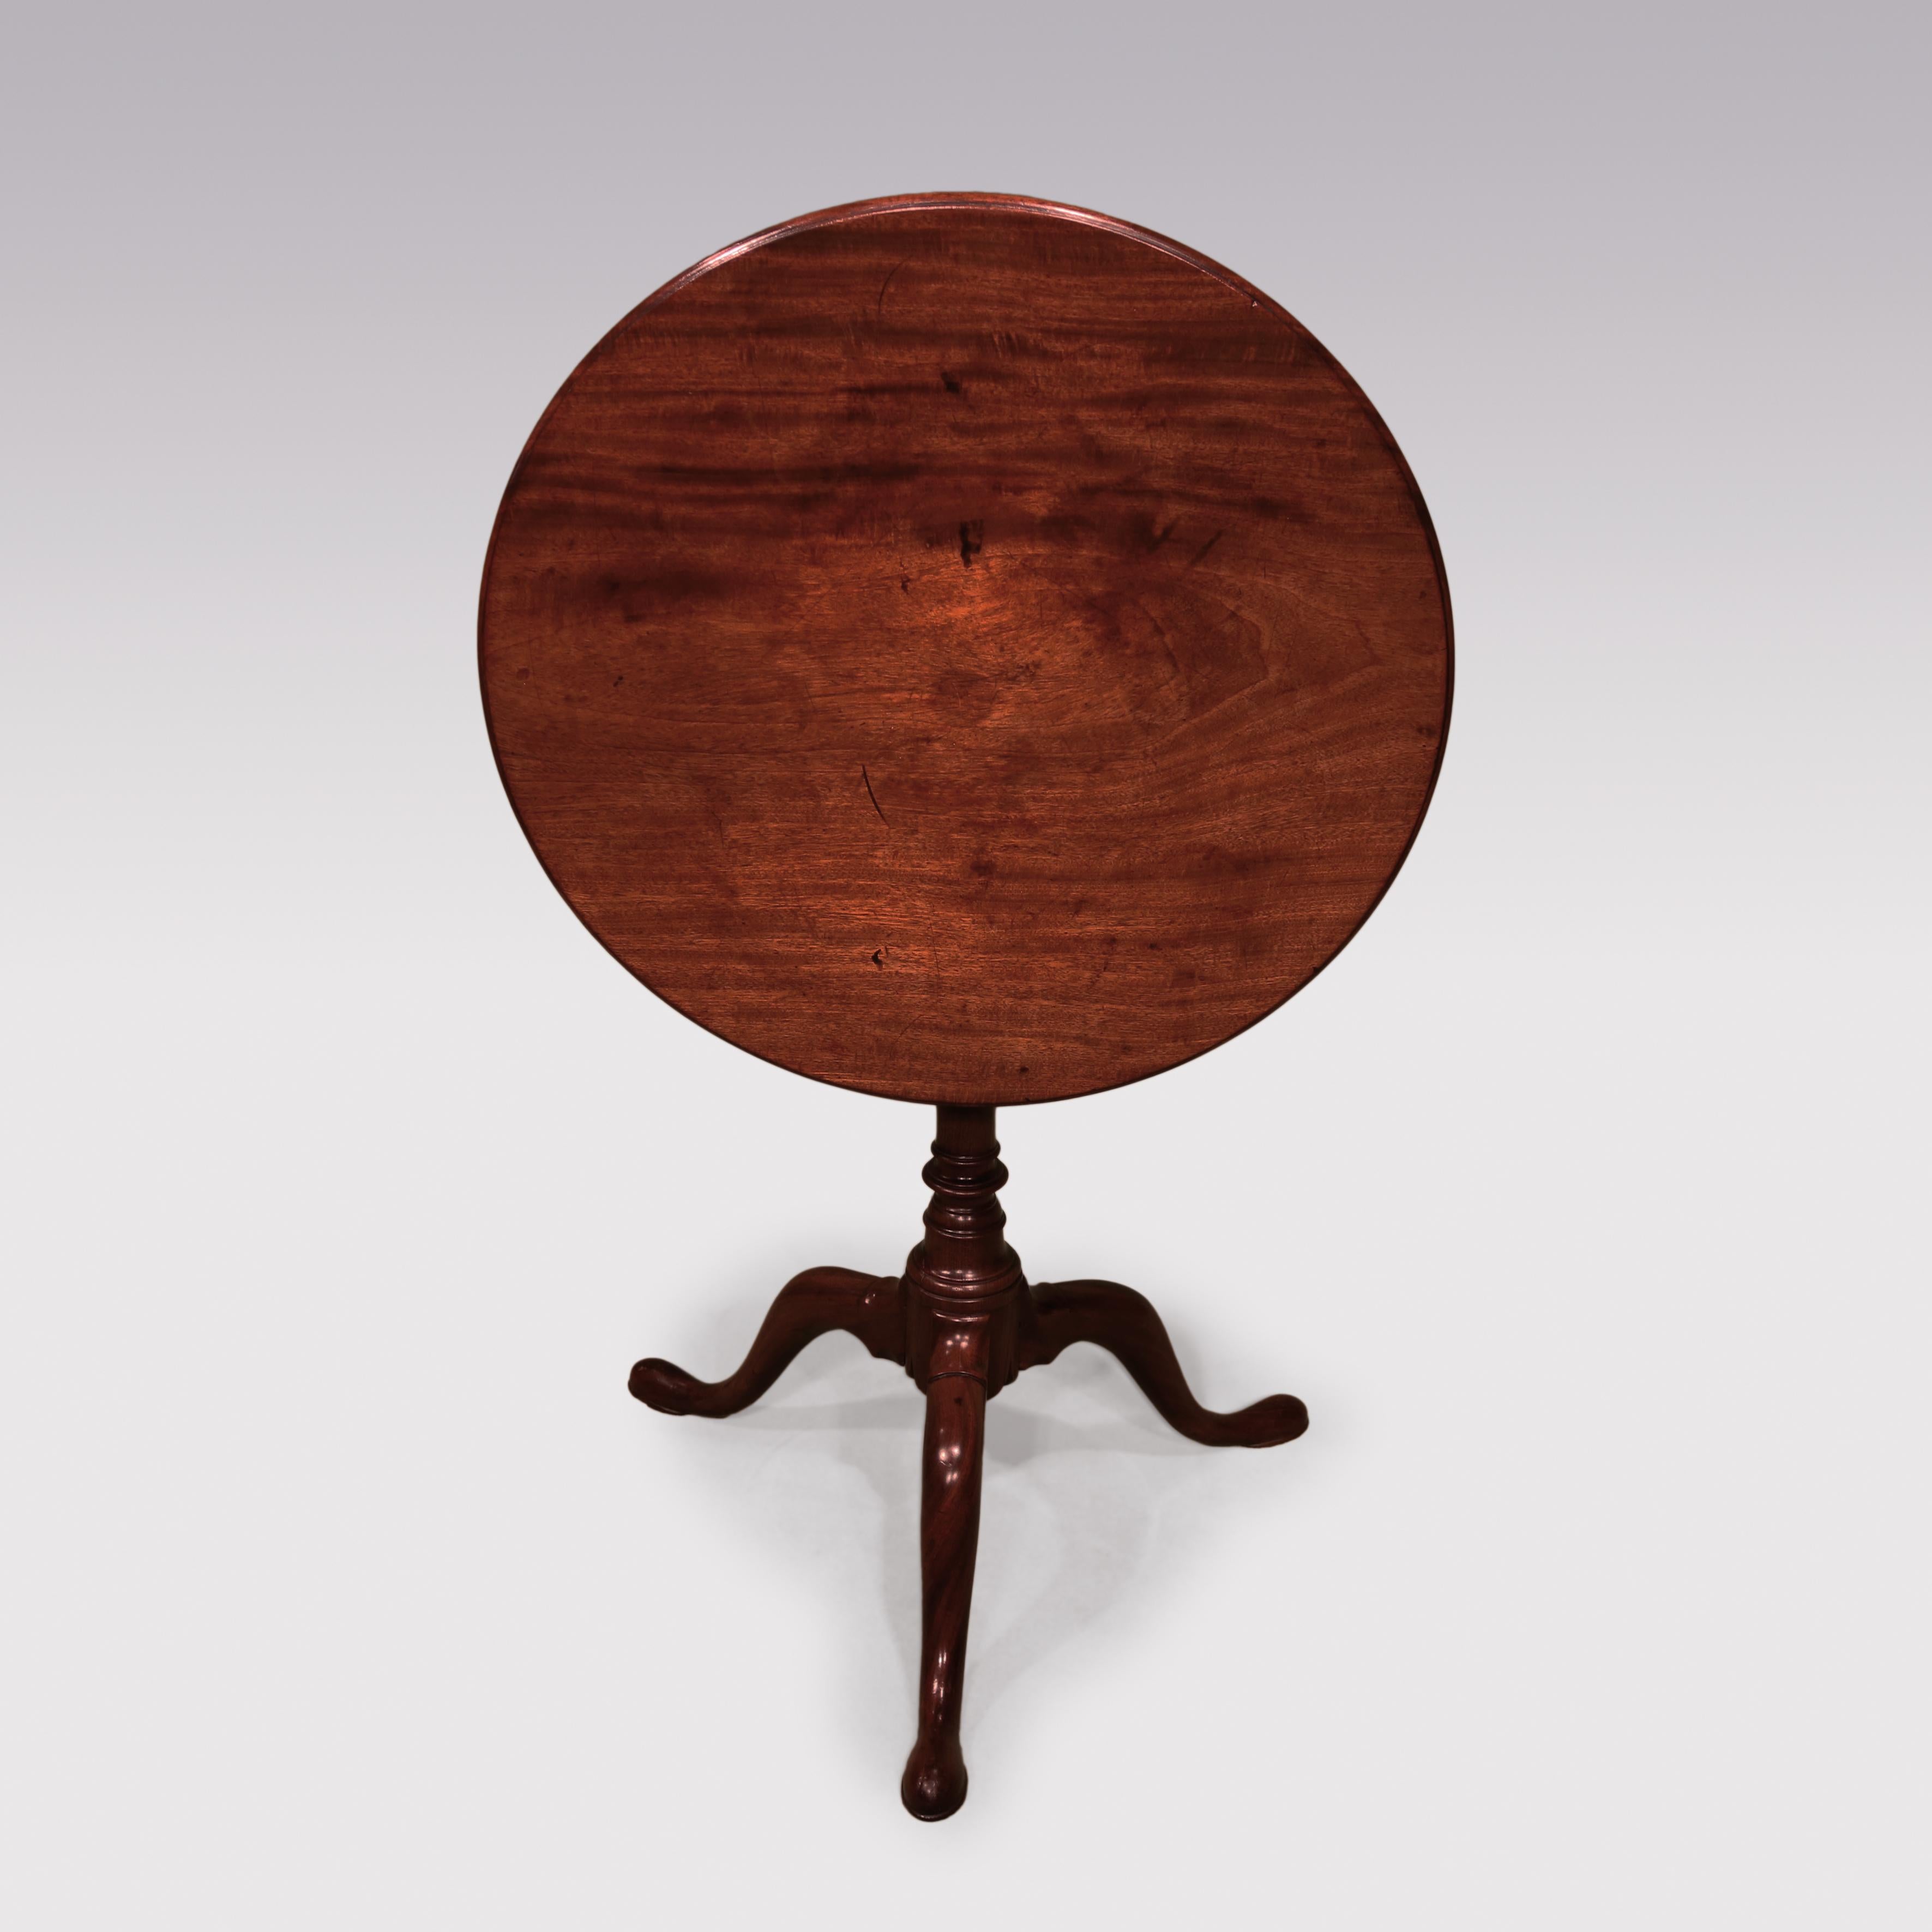 A George II period figured mahogany birdcage-action tripod table, having moulded edged circular top raised on baluster turned stem ending on well-shaped legs with pad feet.